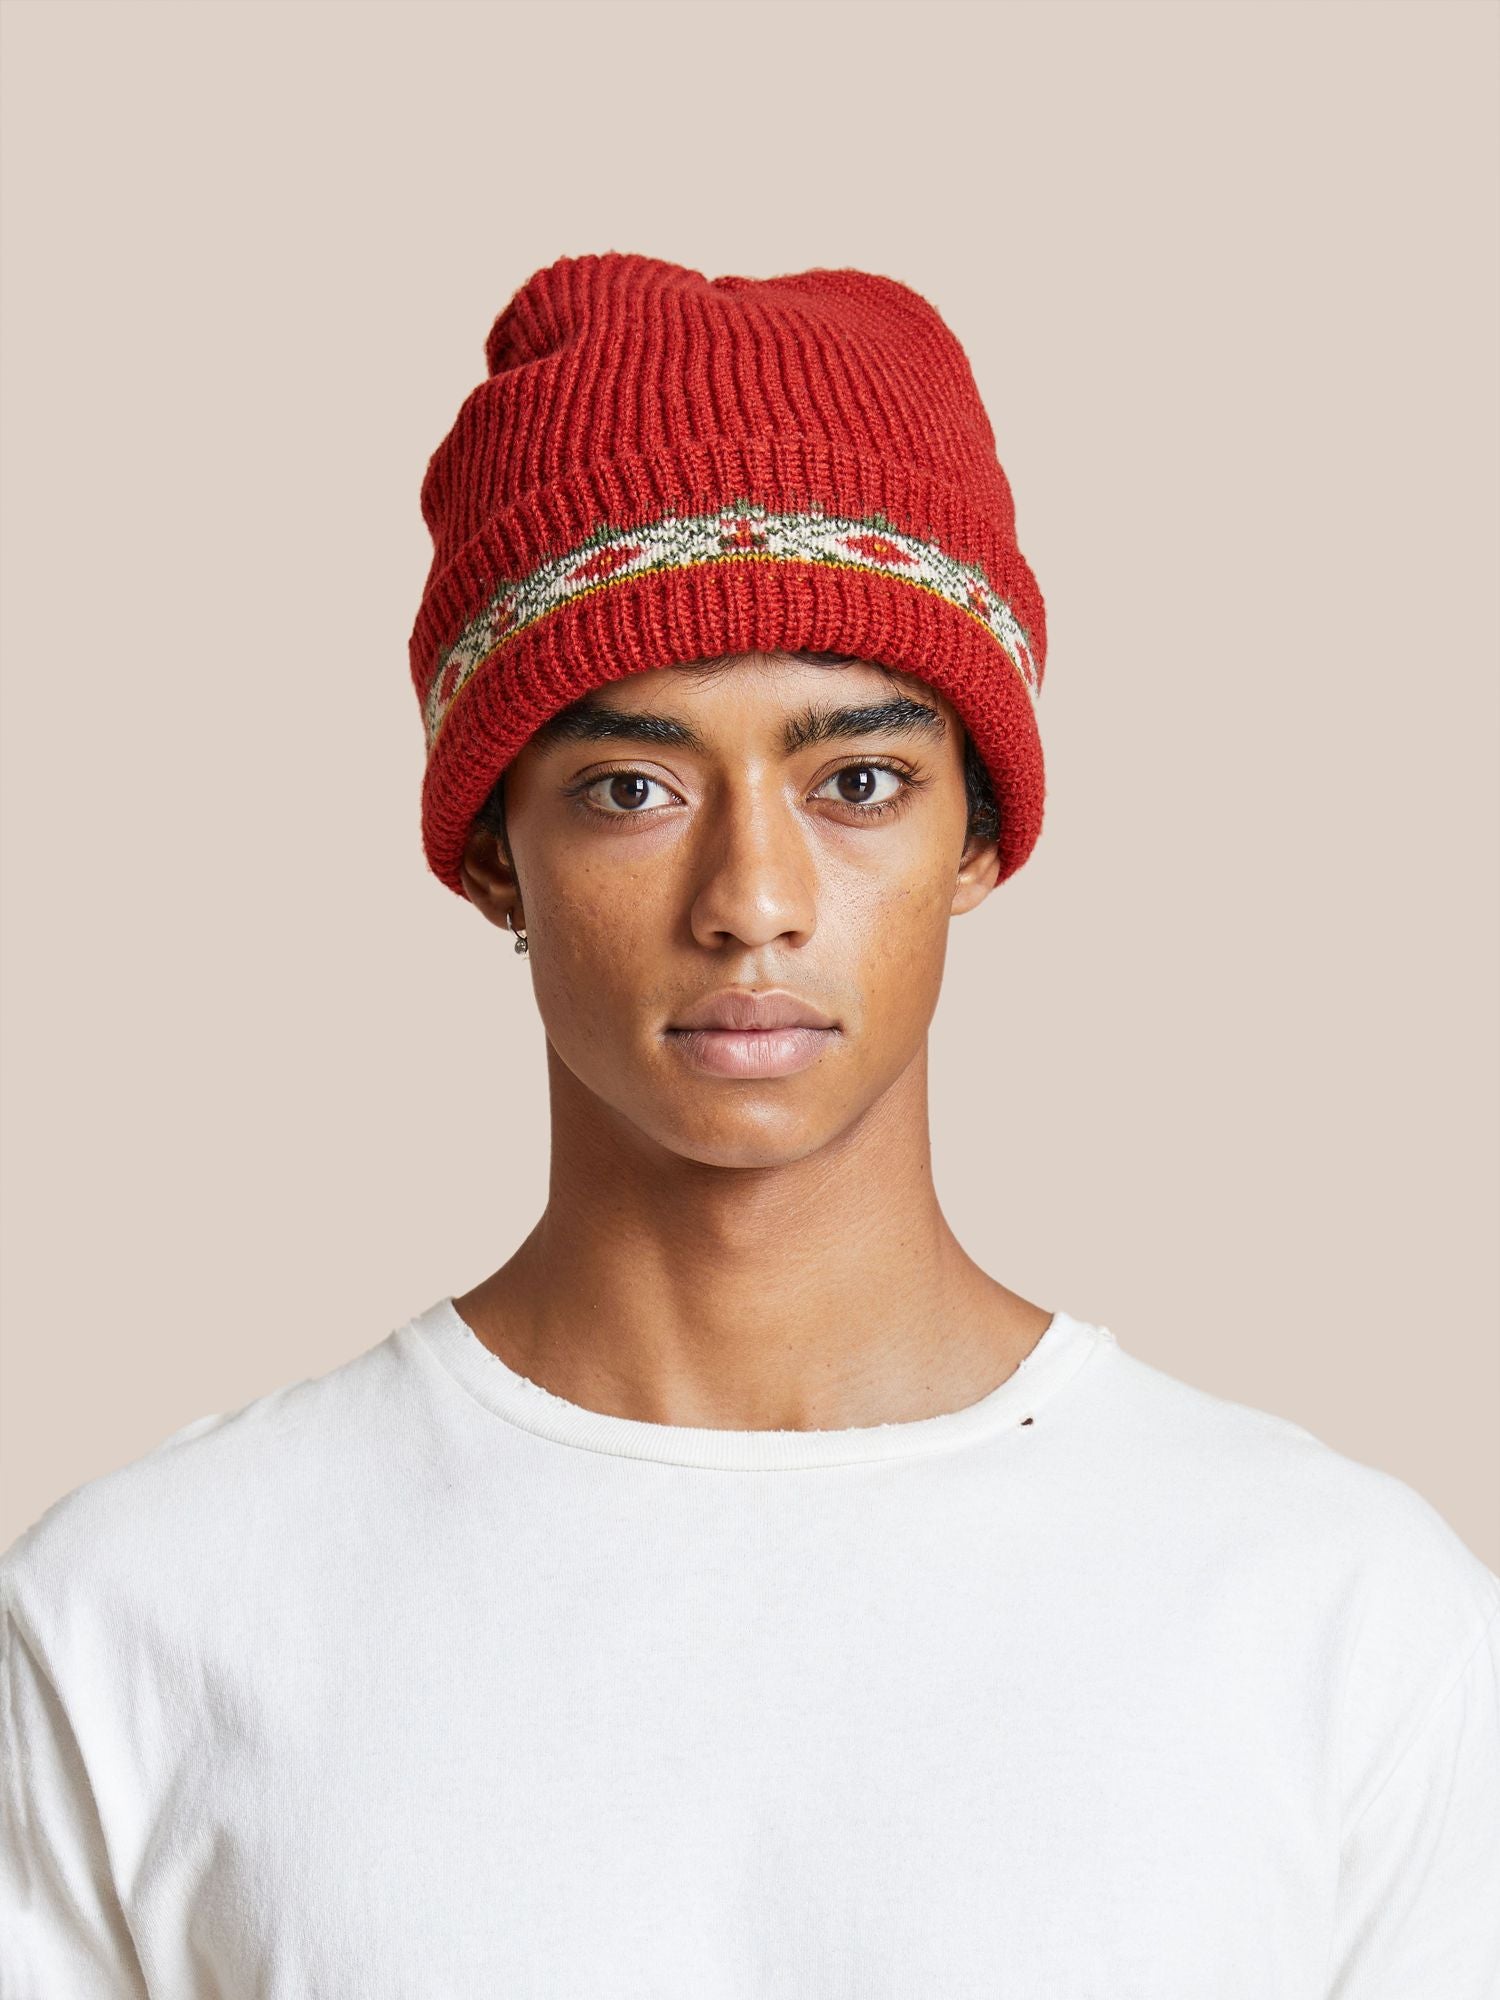 Young man wearing a Profound Ajrak Beanie and white t-shirt, facing directly towards the camera with a neutral expression, against a beige background.